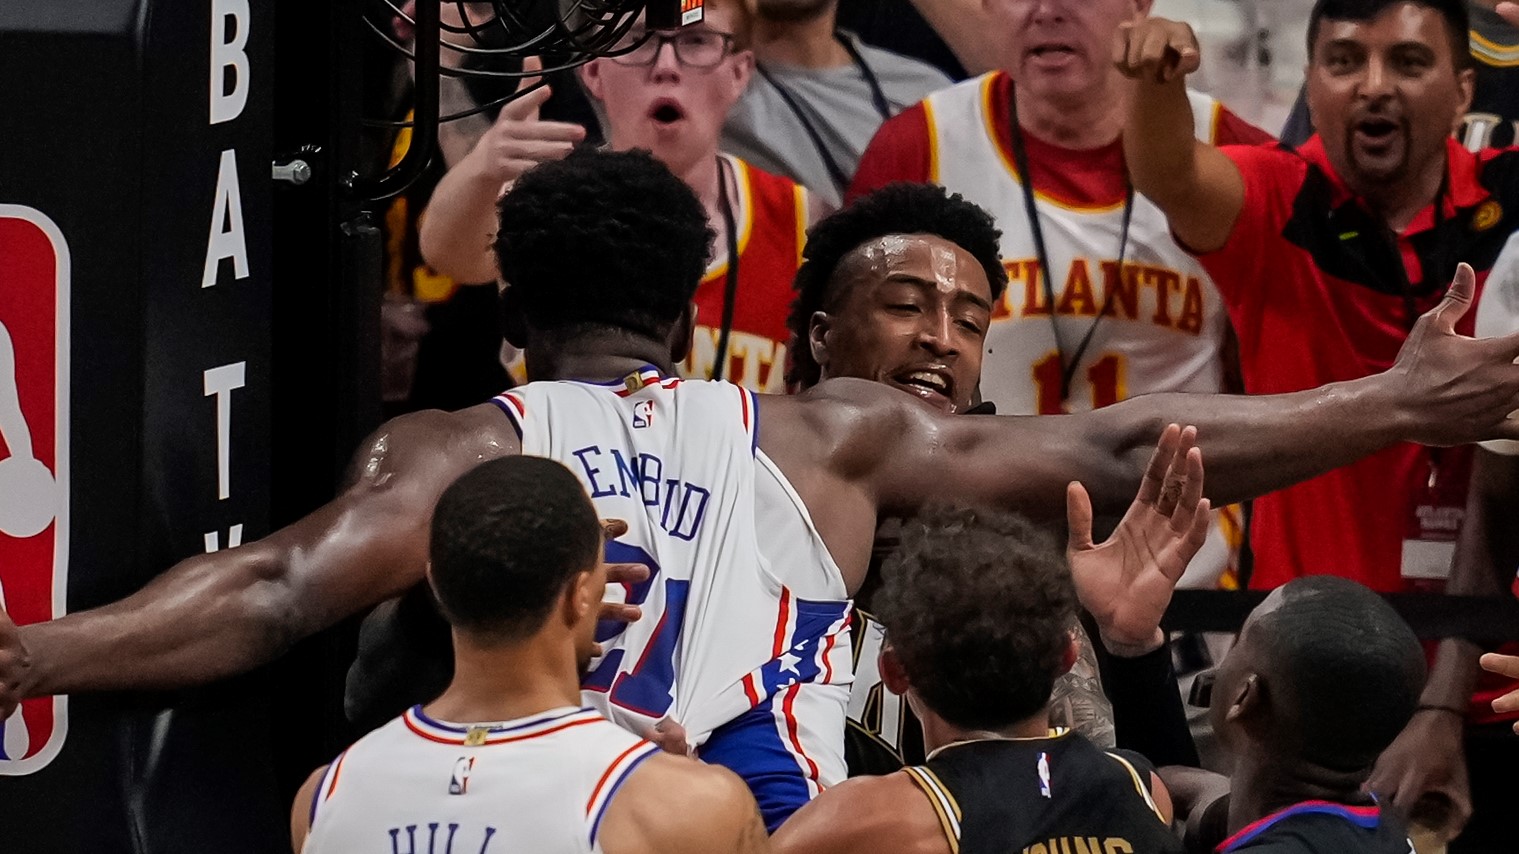 John Collins Dunk on Embiid - John Collins - Posters and Art